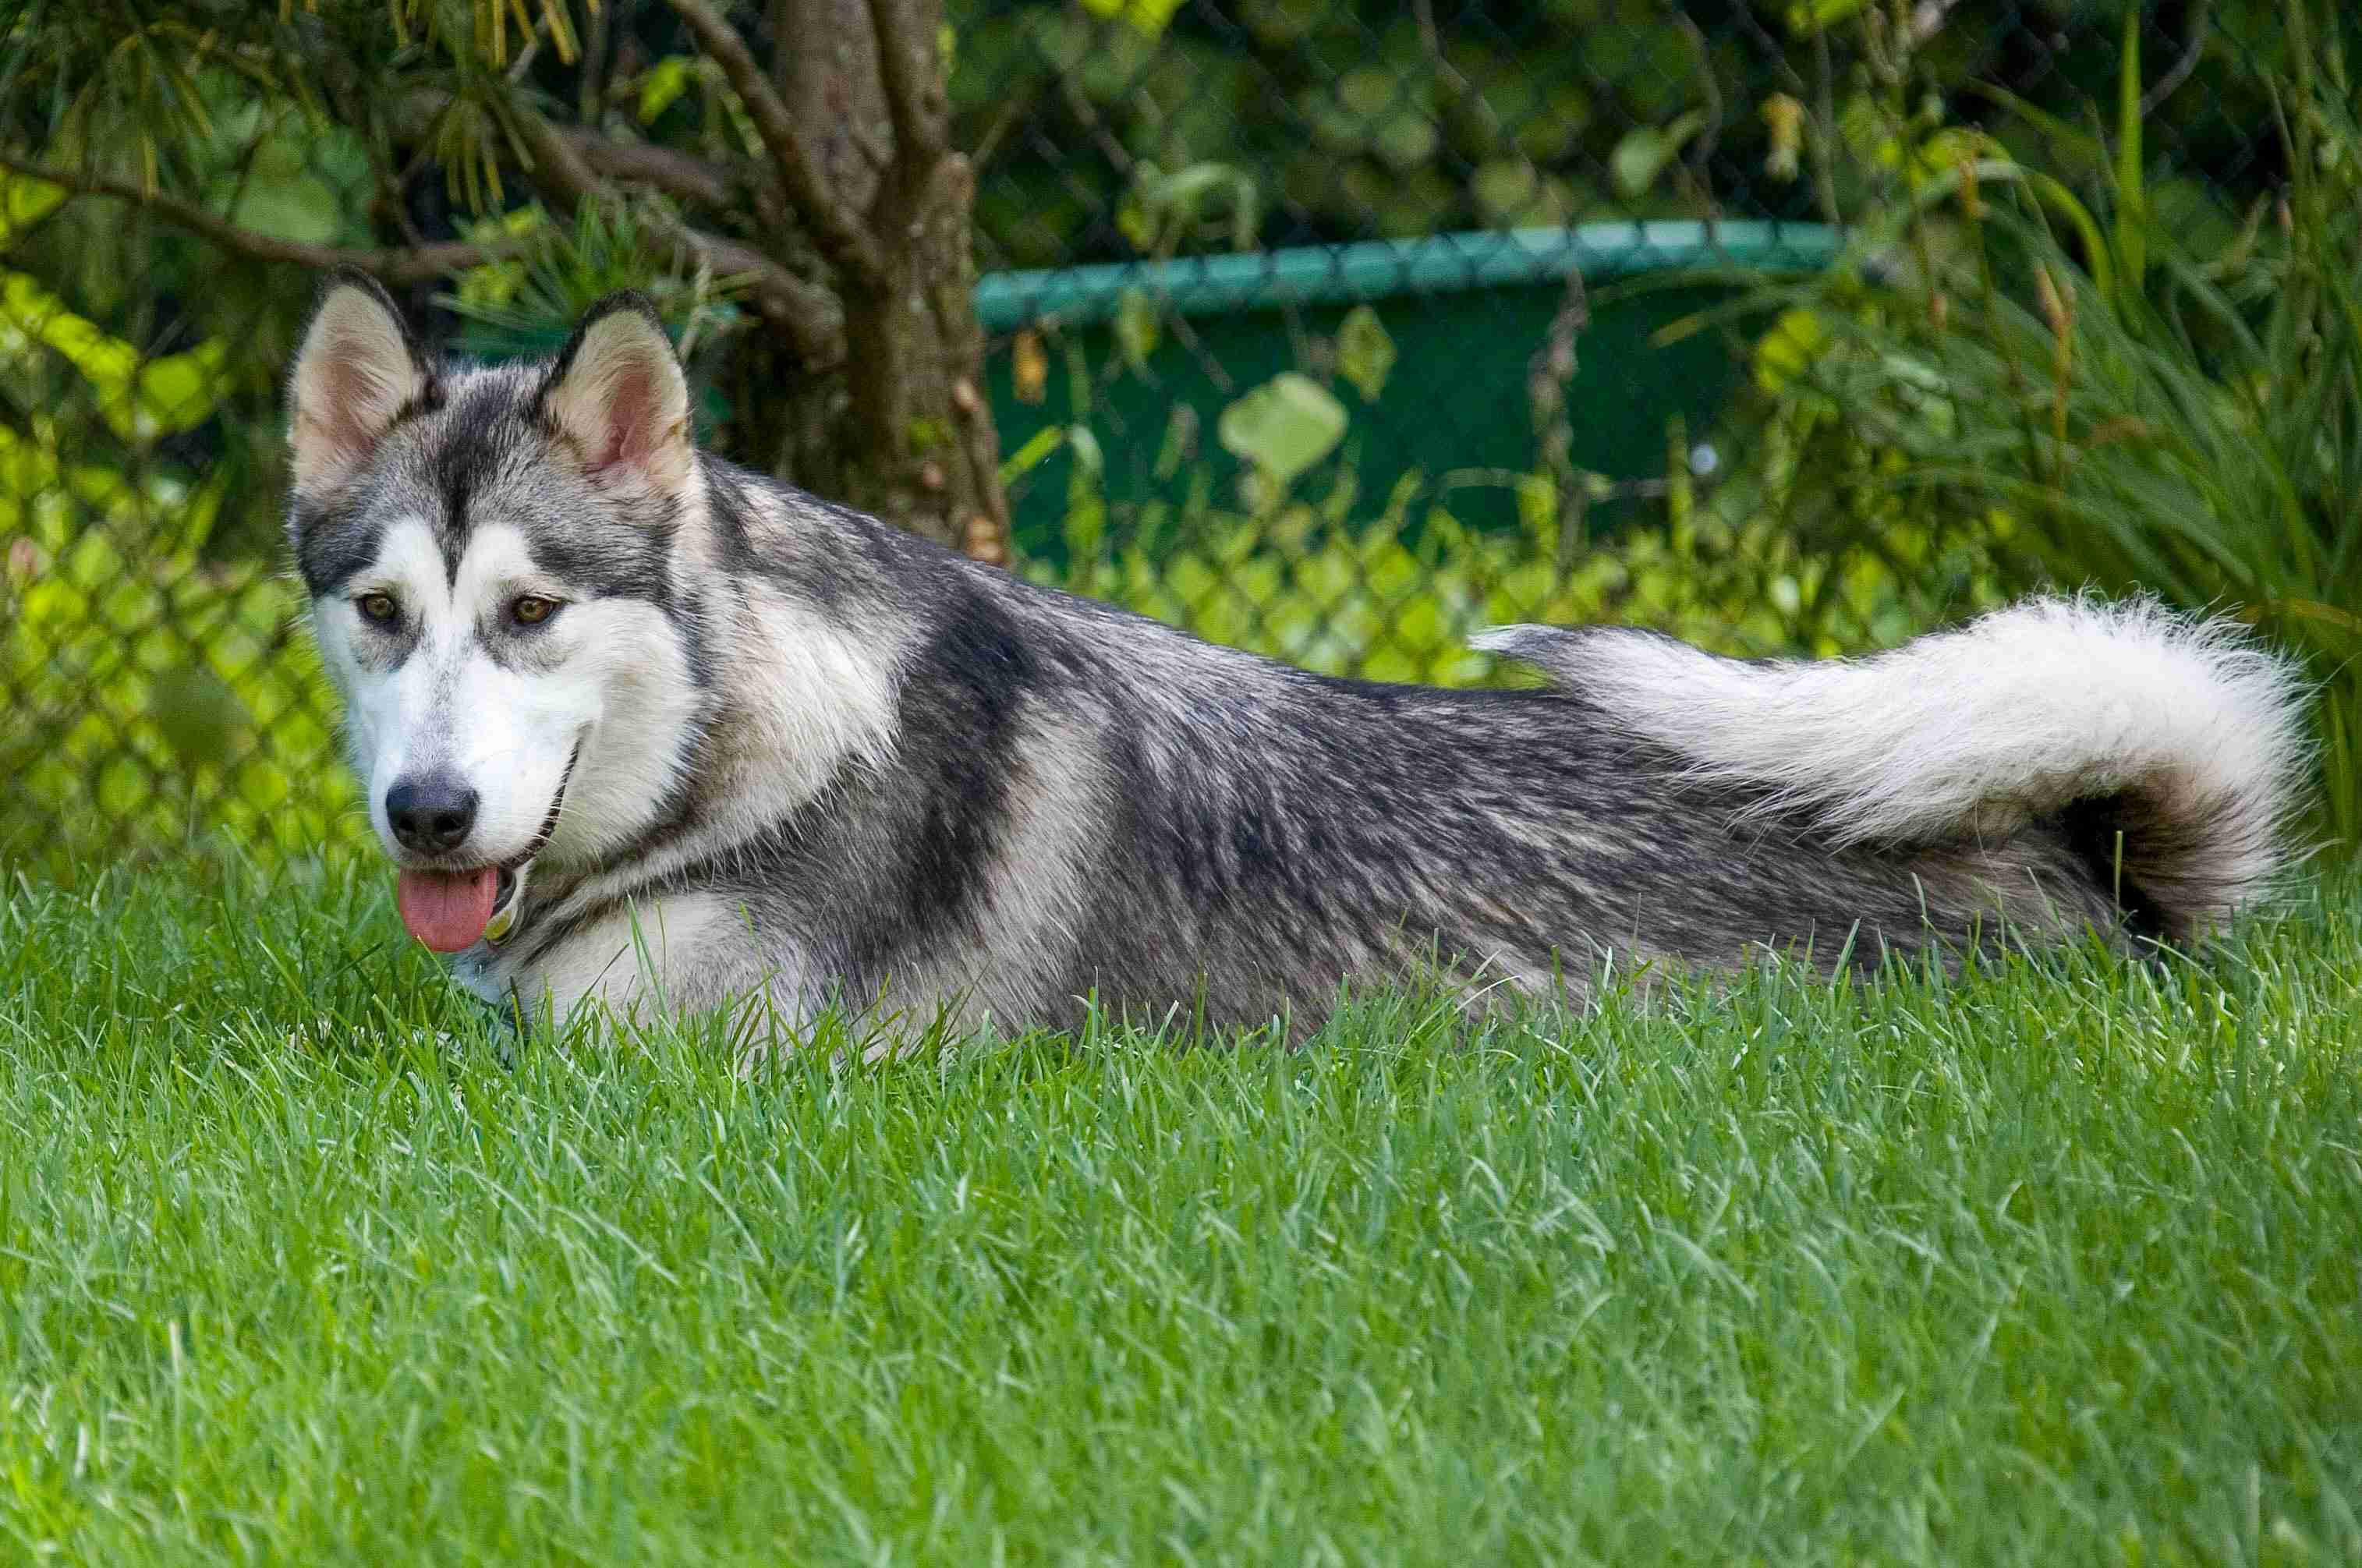 Budgeting for Your Furry Friend: The Cost of Owning and Caring for an Alaskan Malamute